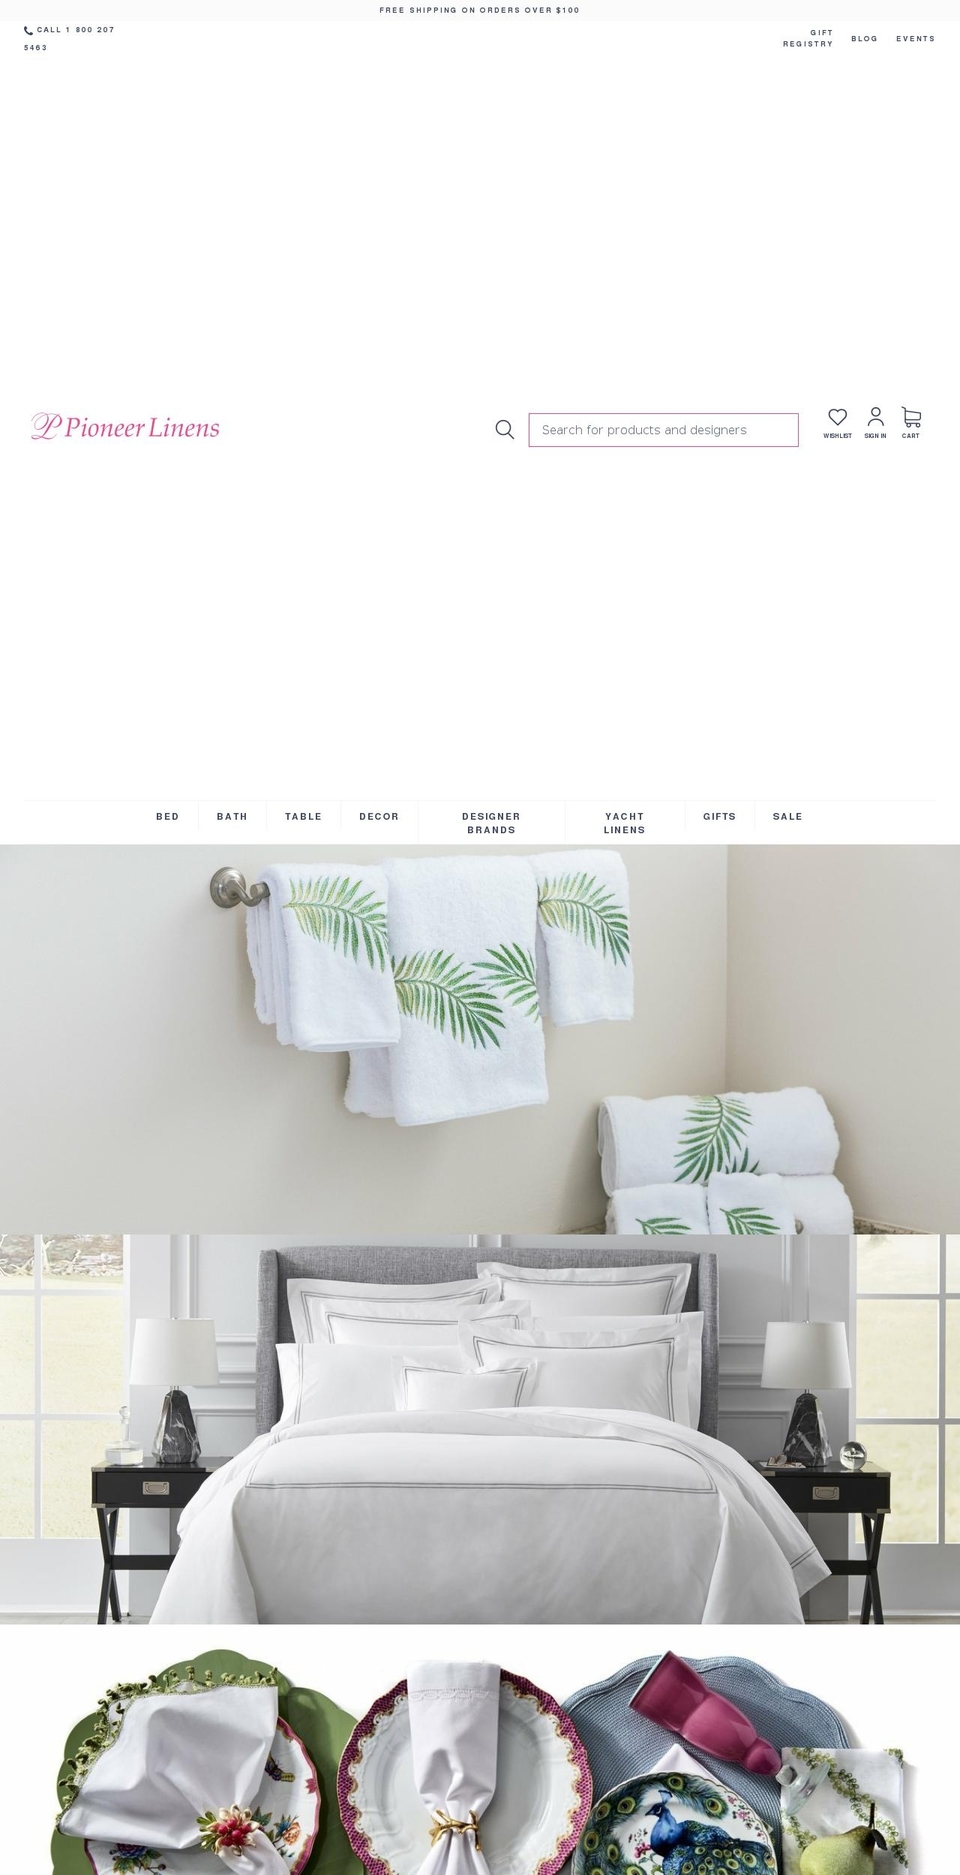 Buko Shopify Theme - Products Consolidation Shopify theme site example robbstocky.com